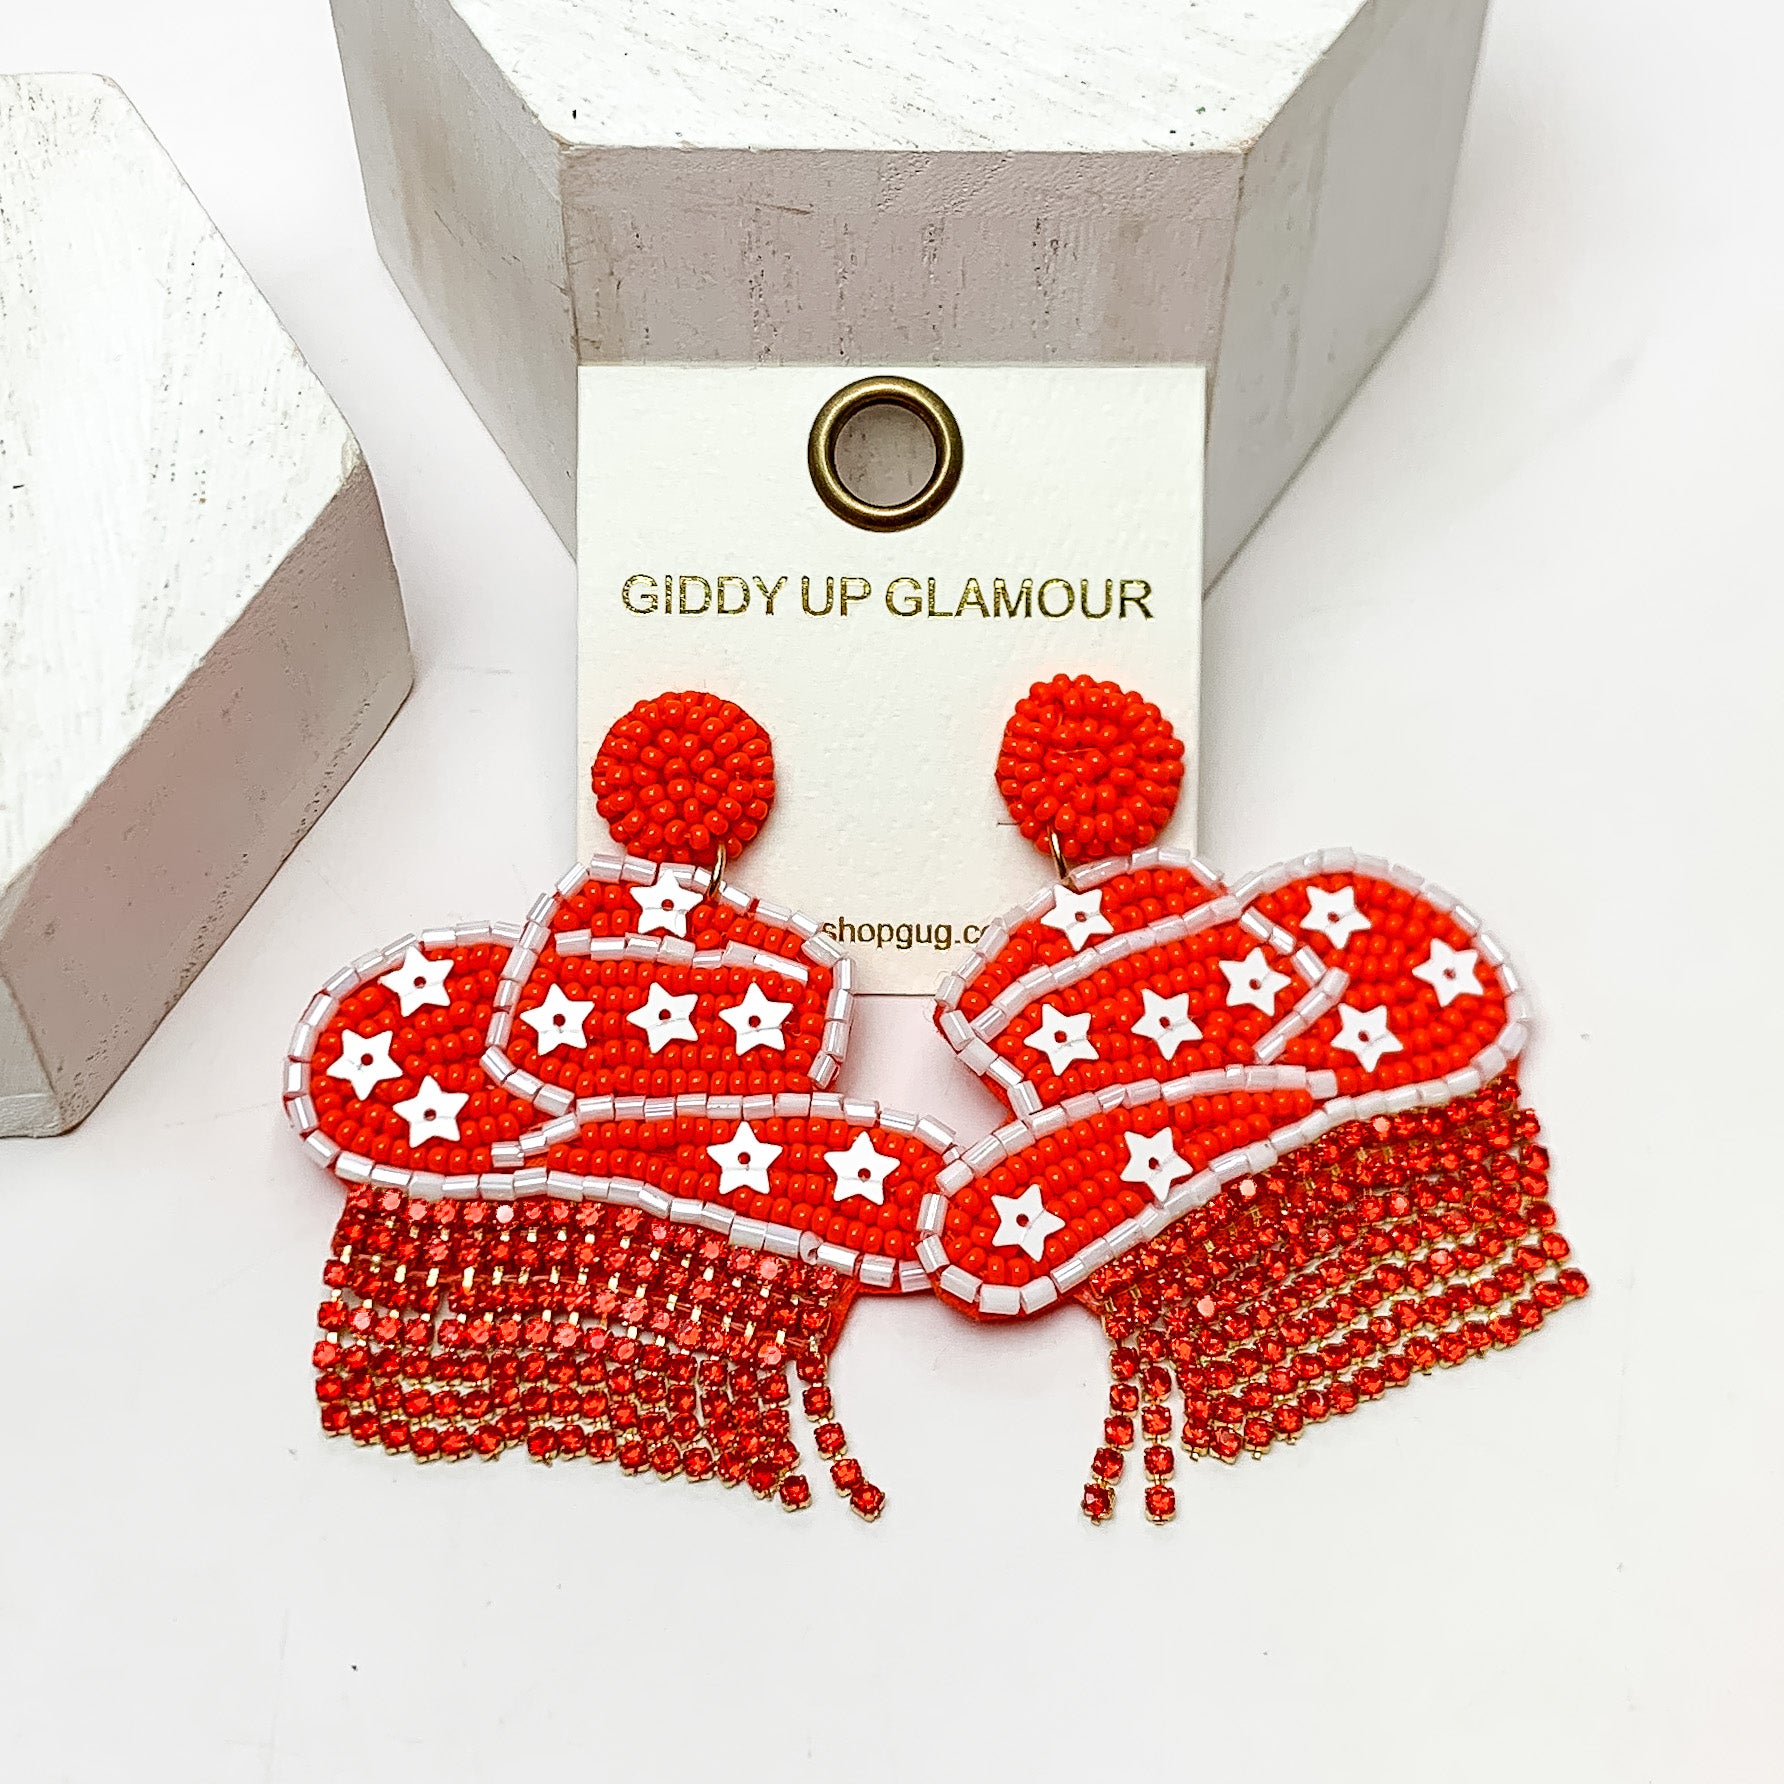 Gameday Beaded Cowboy Hat Earrings with White Crystal Fringe in Orange and White. These earrings are pictured on a white background with white posts behind them.